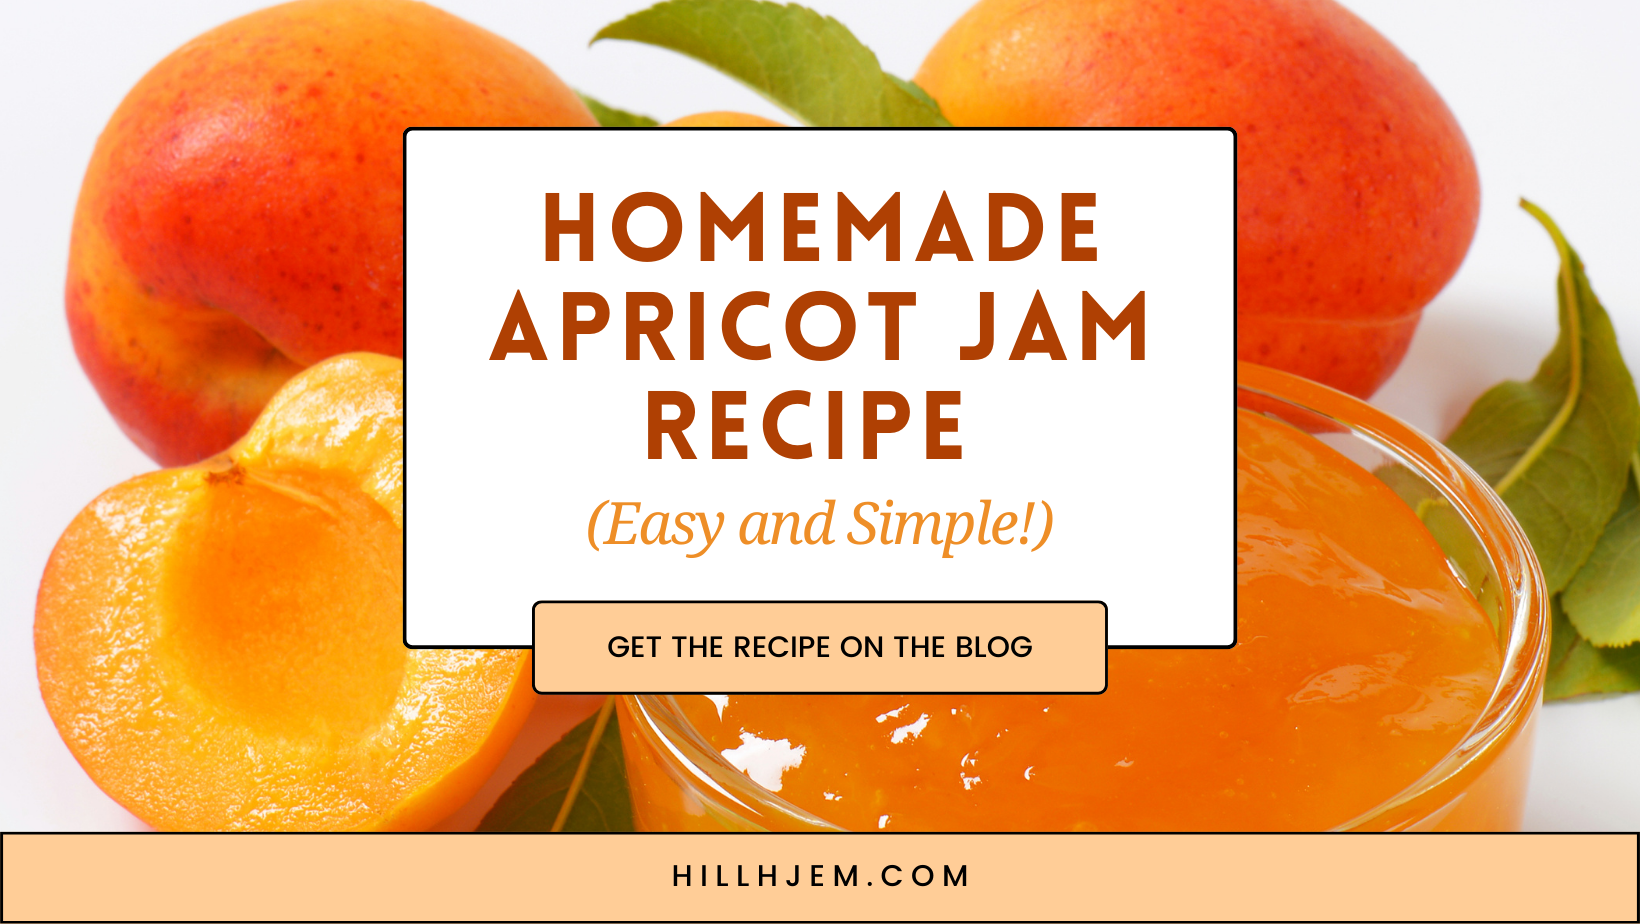 Homemade Apricot Jam Recipe (Easy and Simple!)